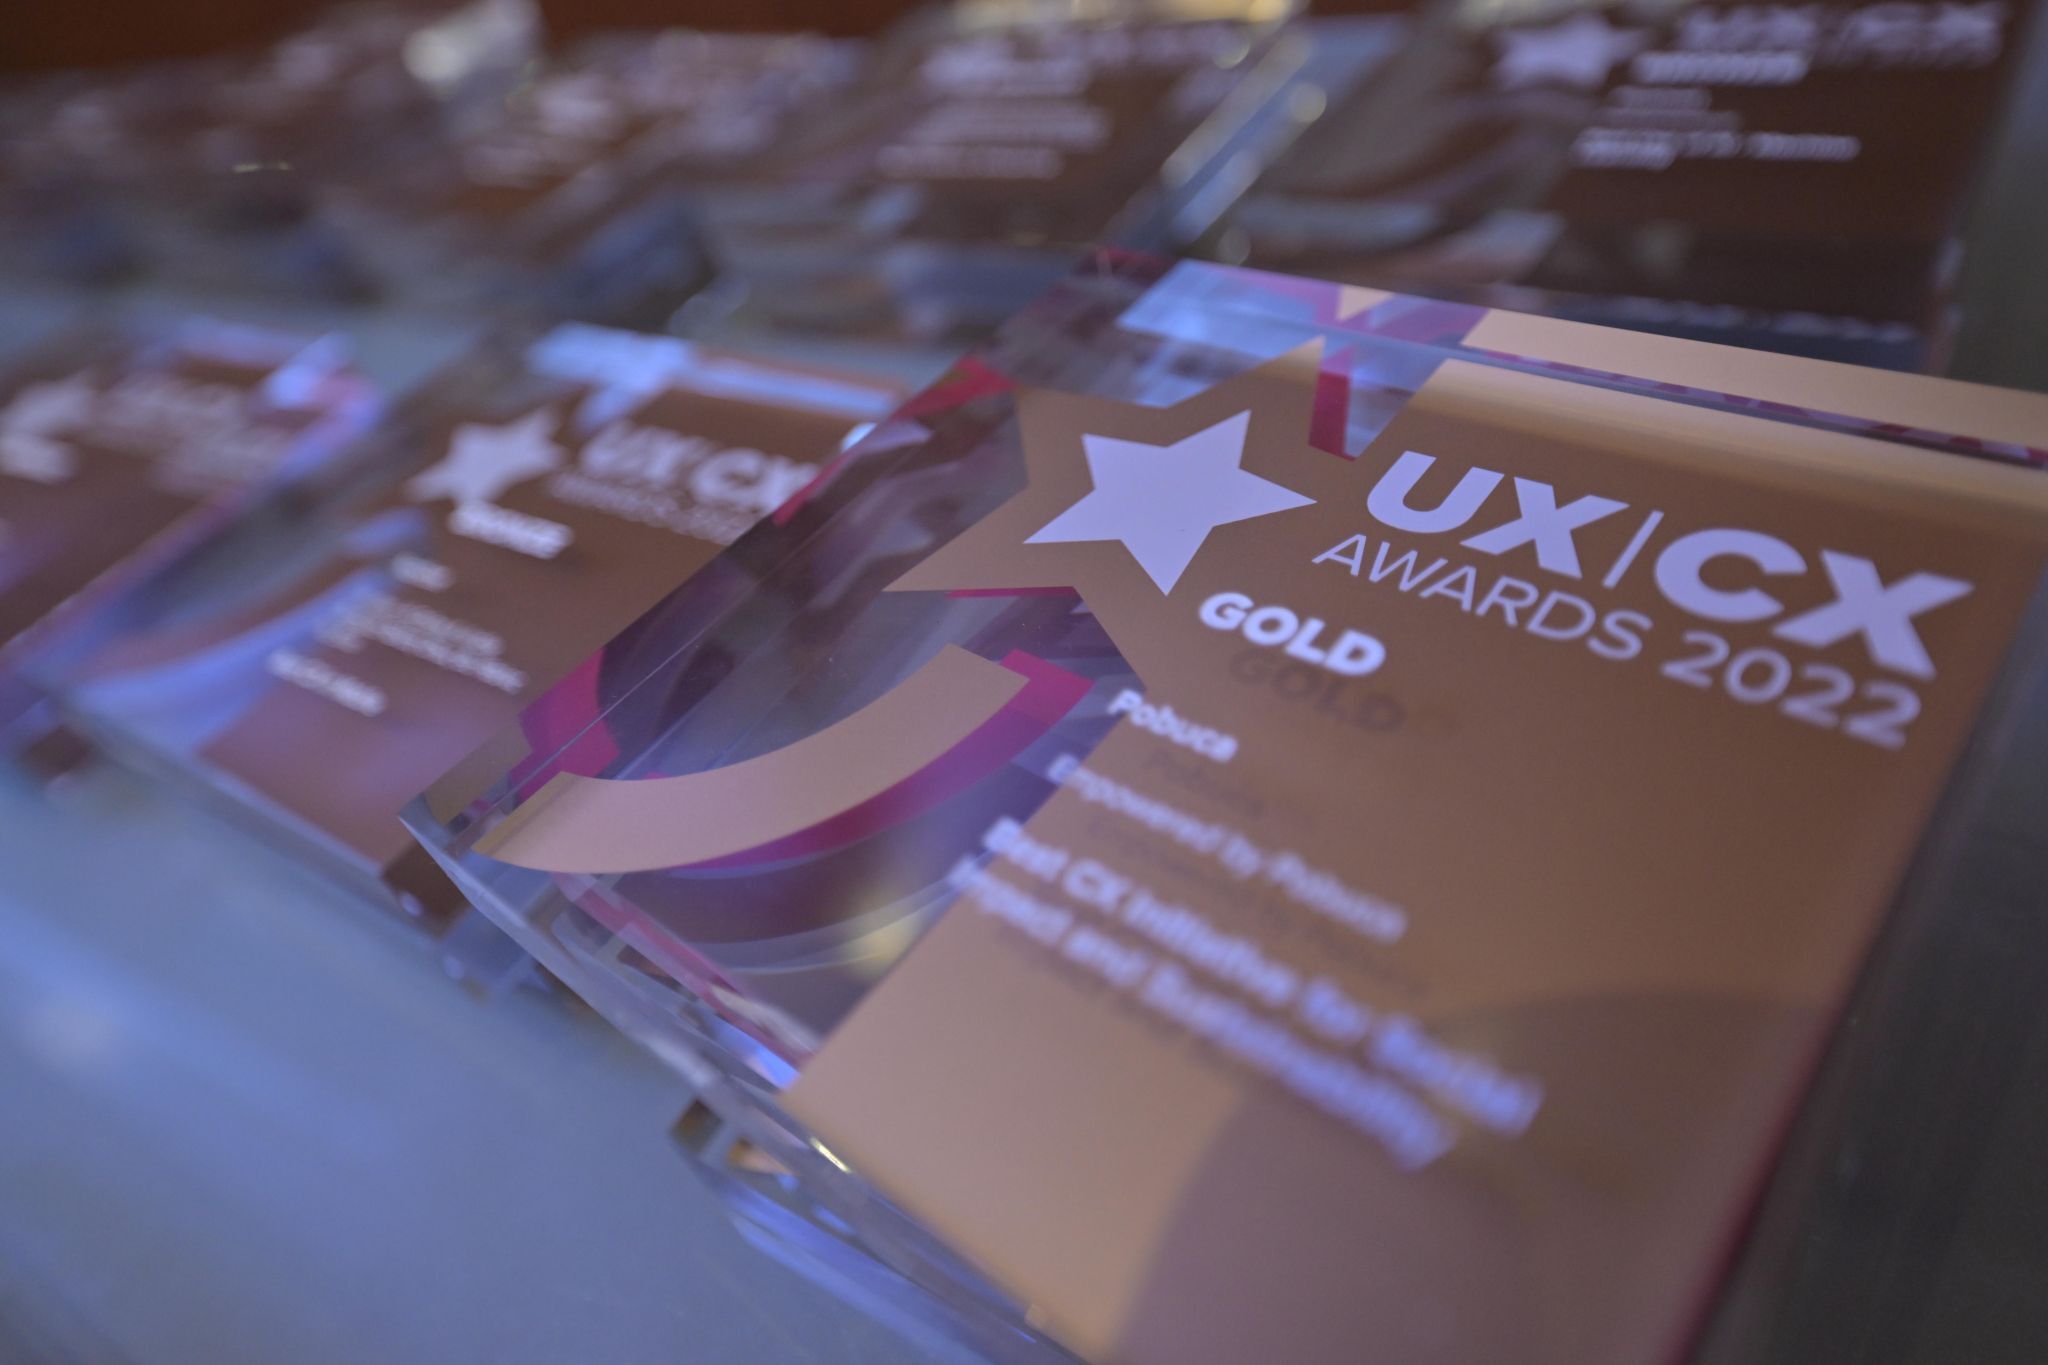 Pobuca received two golds in the categories "Best Customer Experience during a Crisis", "Best CX Initiative for Social Impact and Sustainability" and a bronze in the category “Best in Fashion & Beauty”.